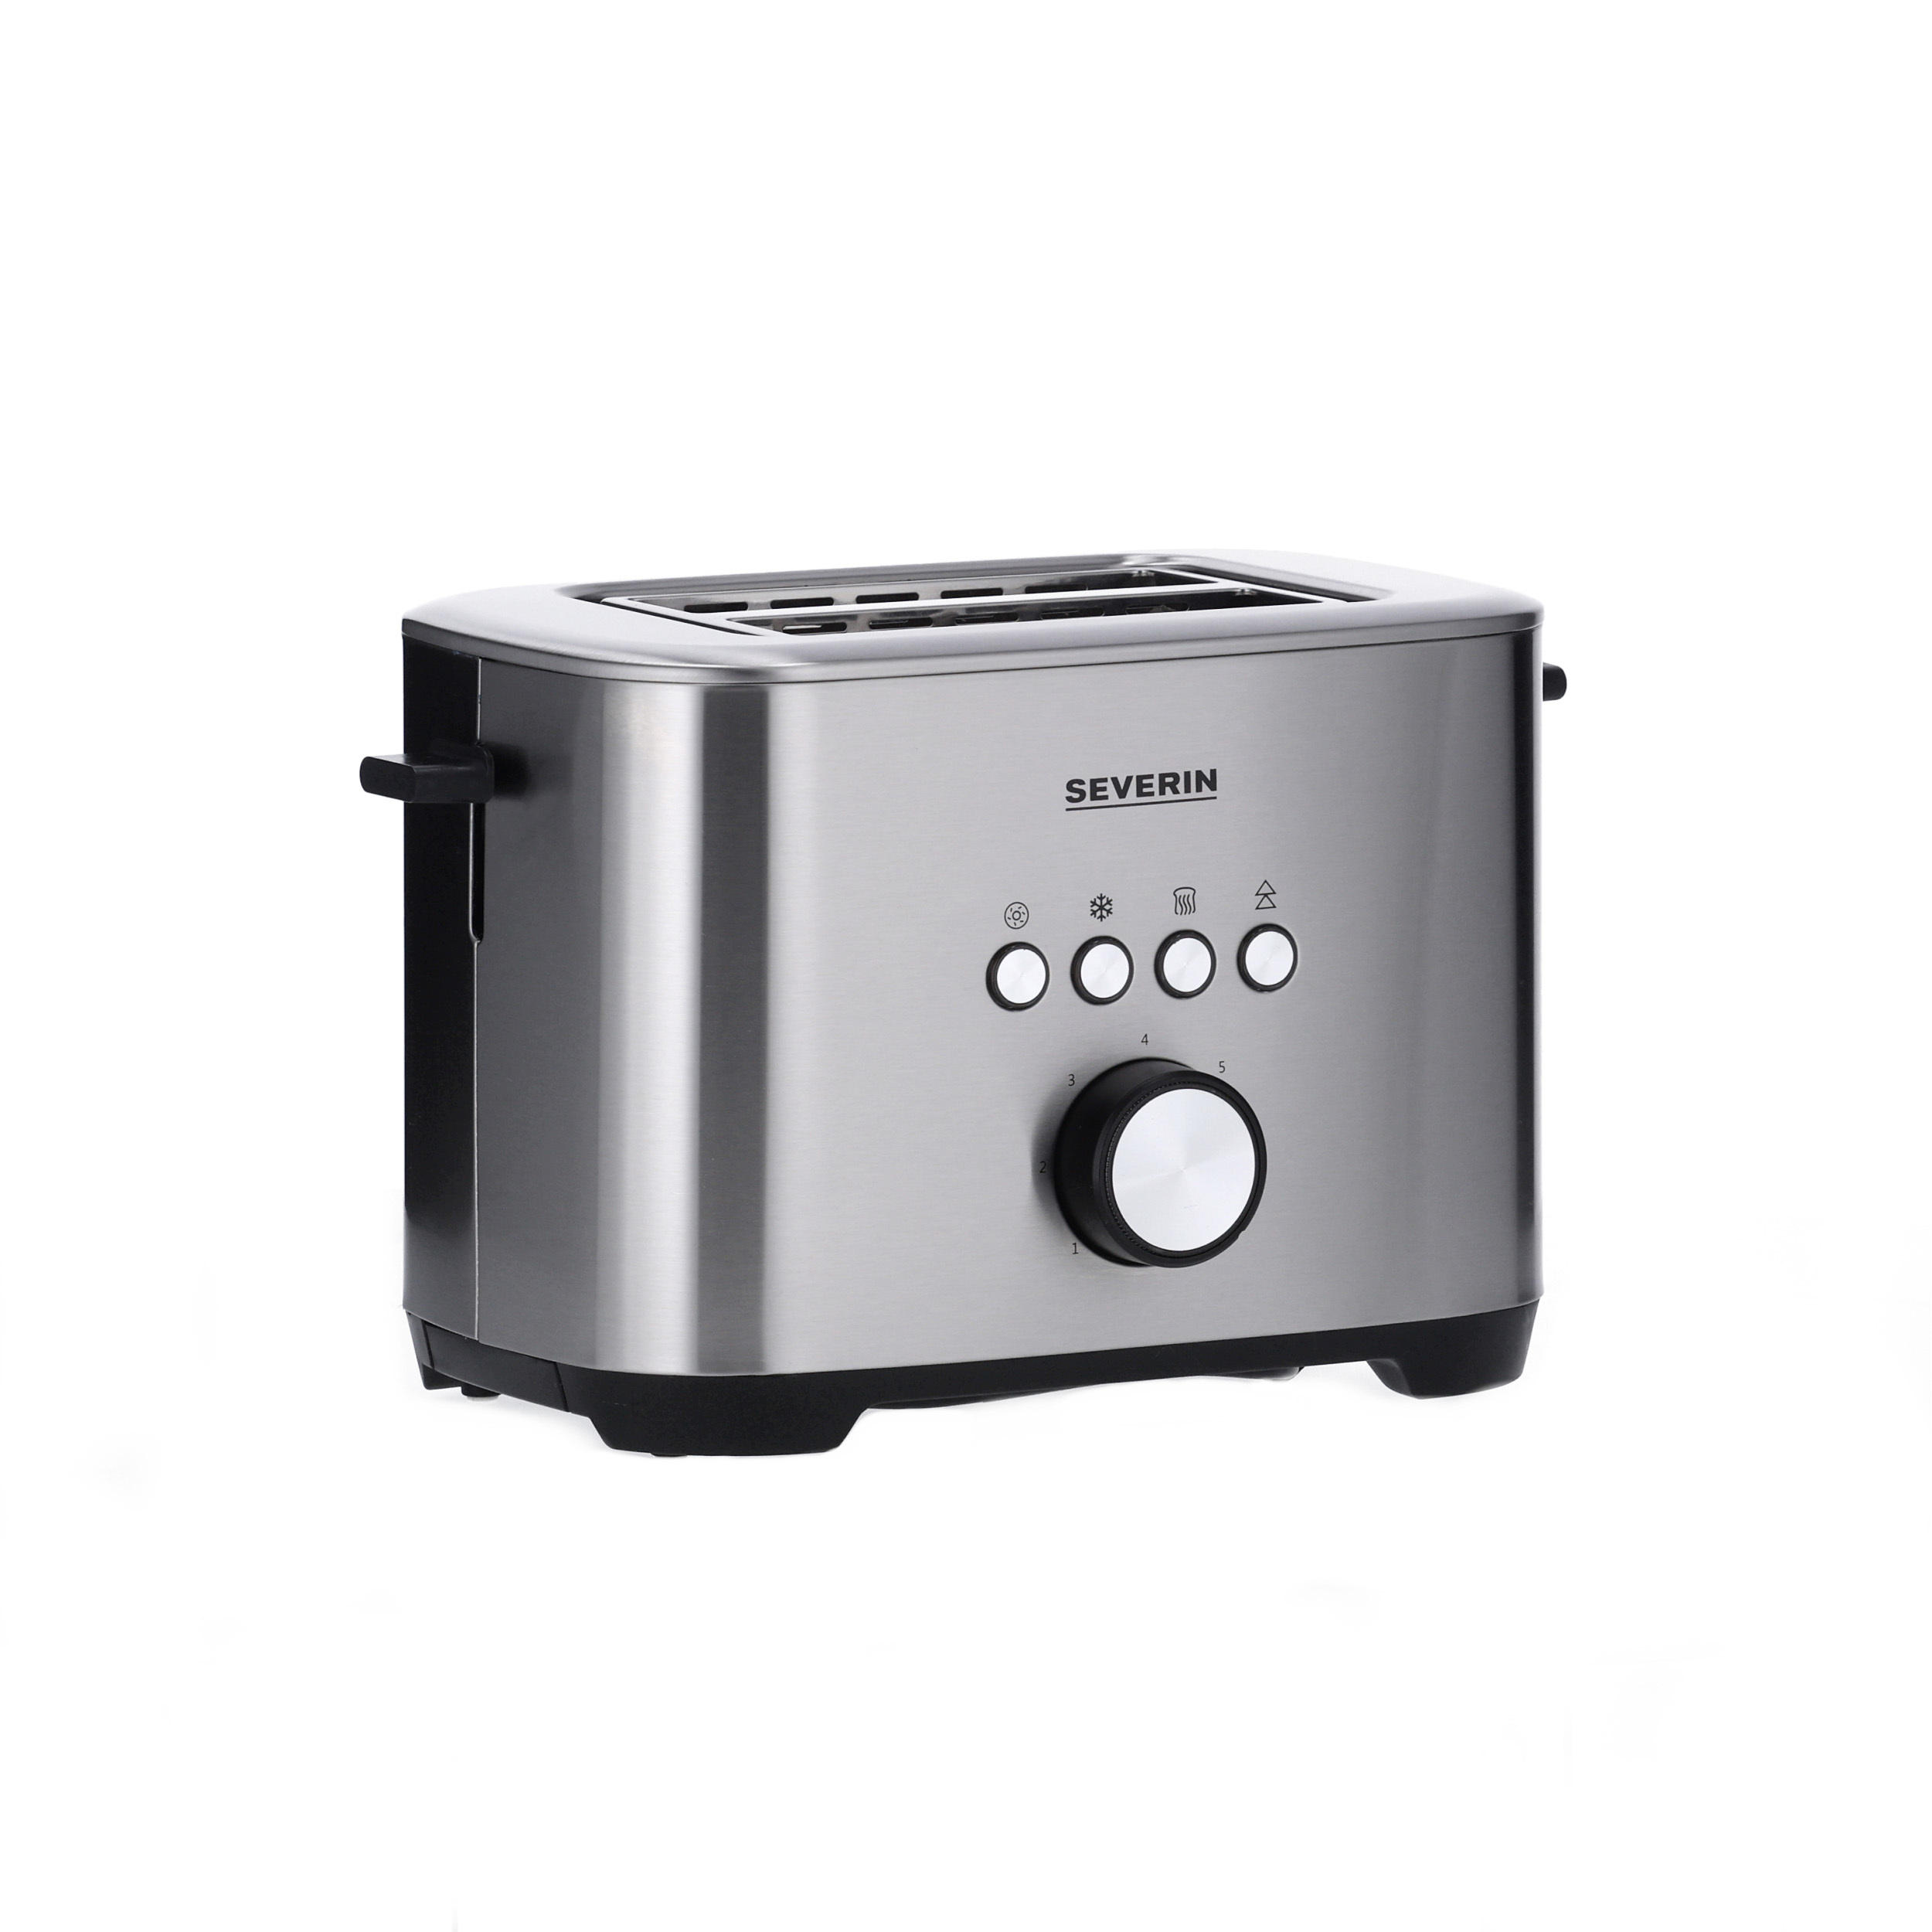 Severin Toaster with Bagel Function 2 Slice